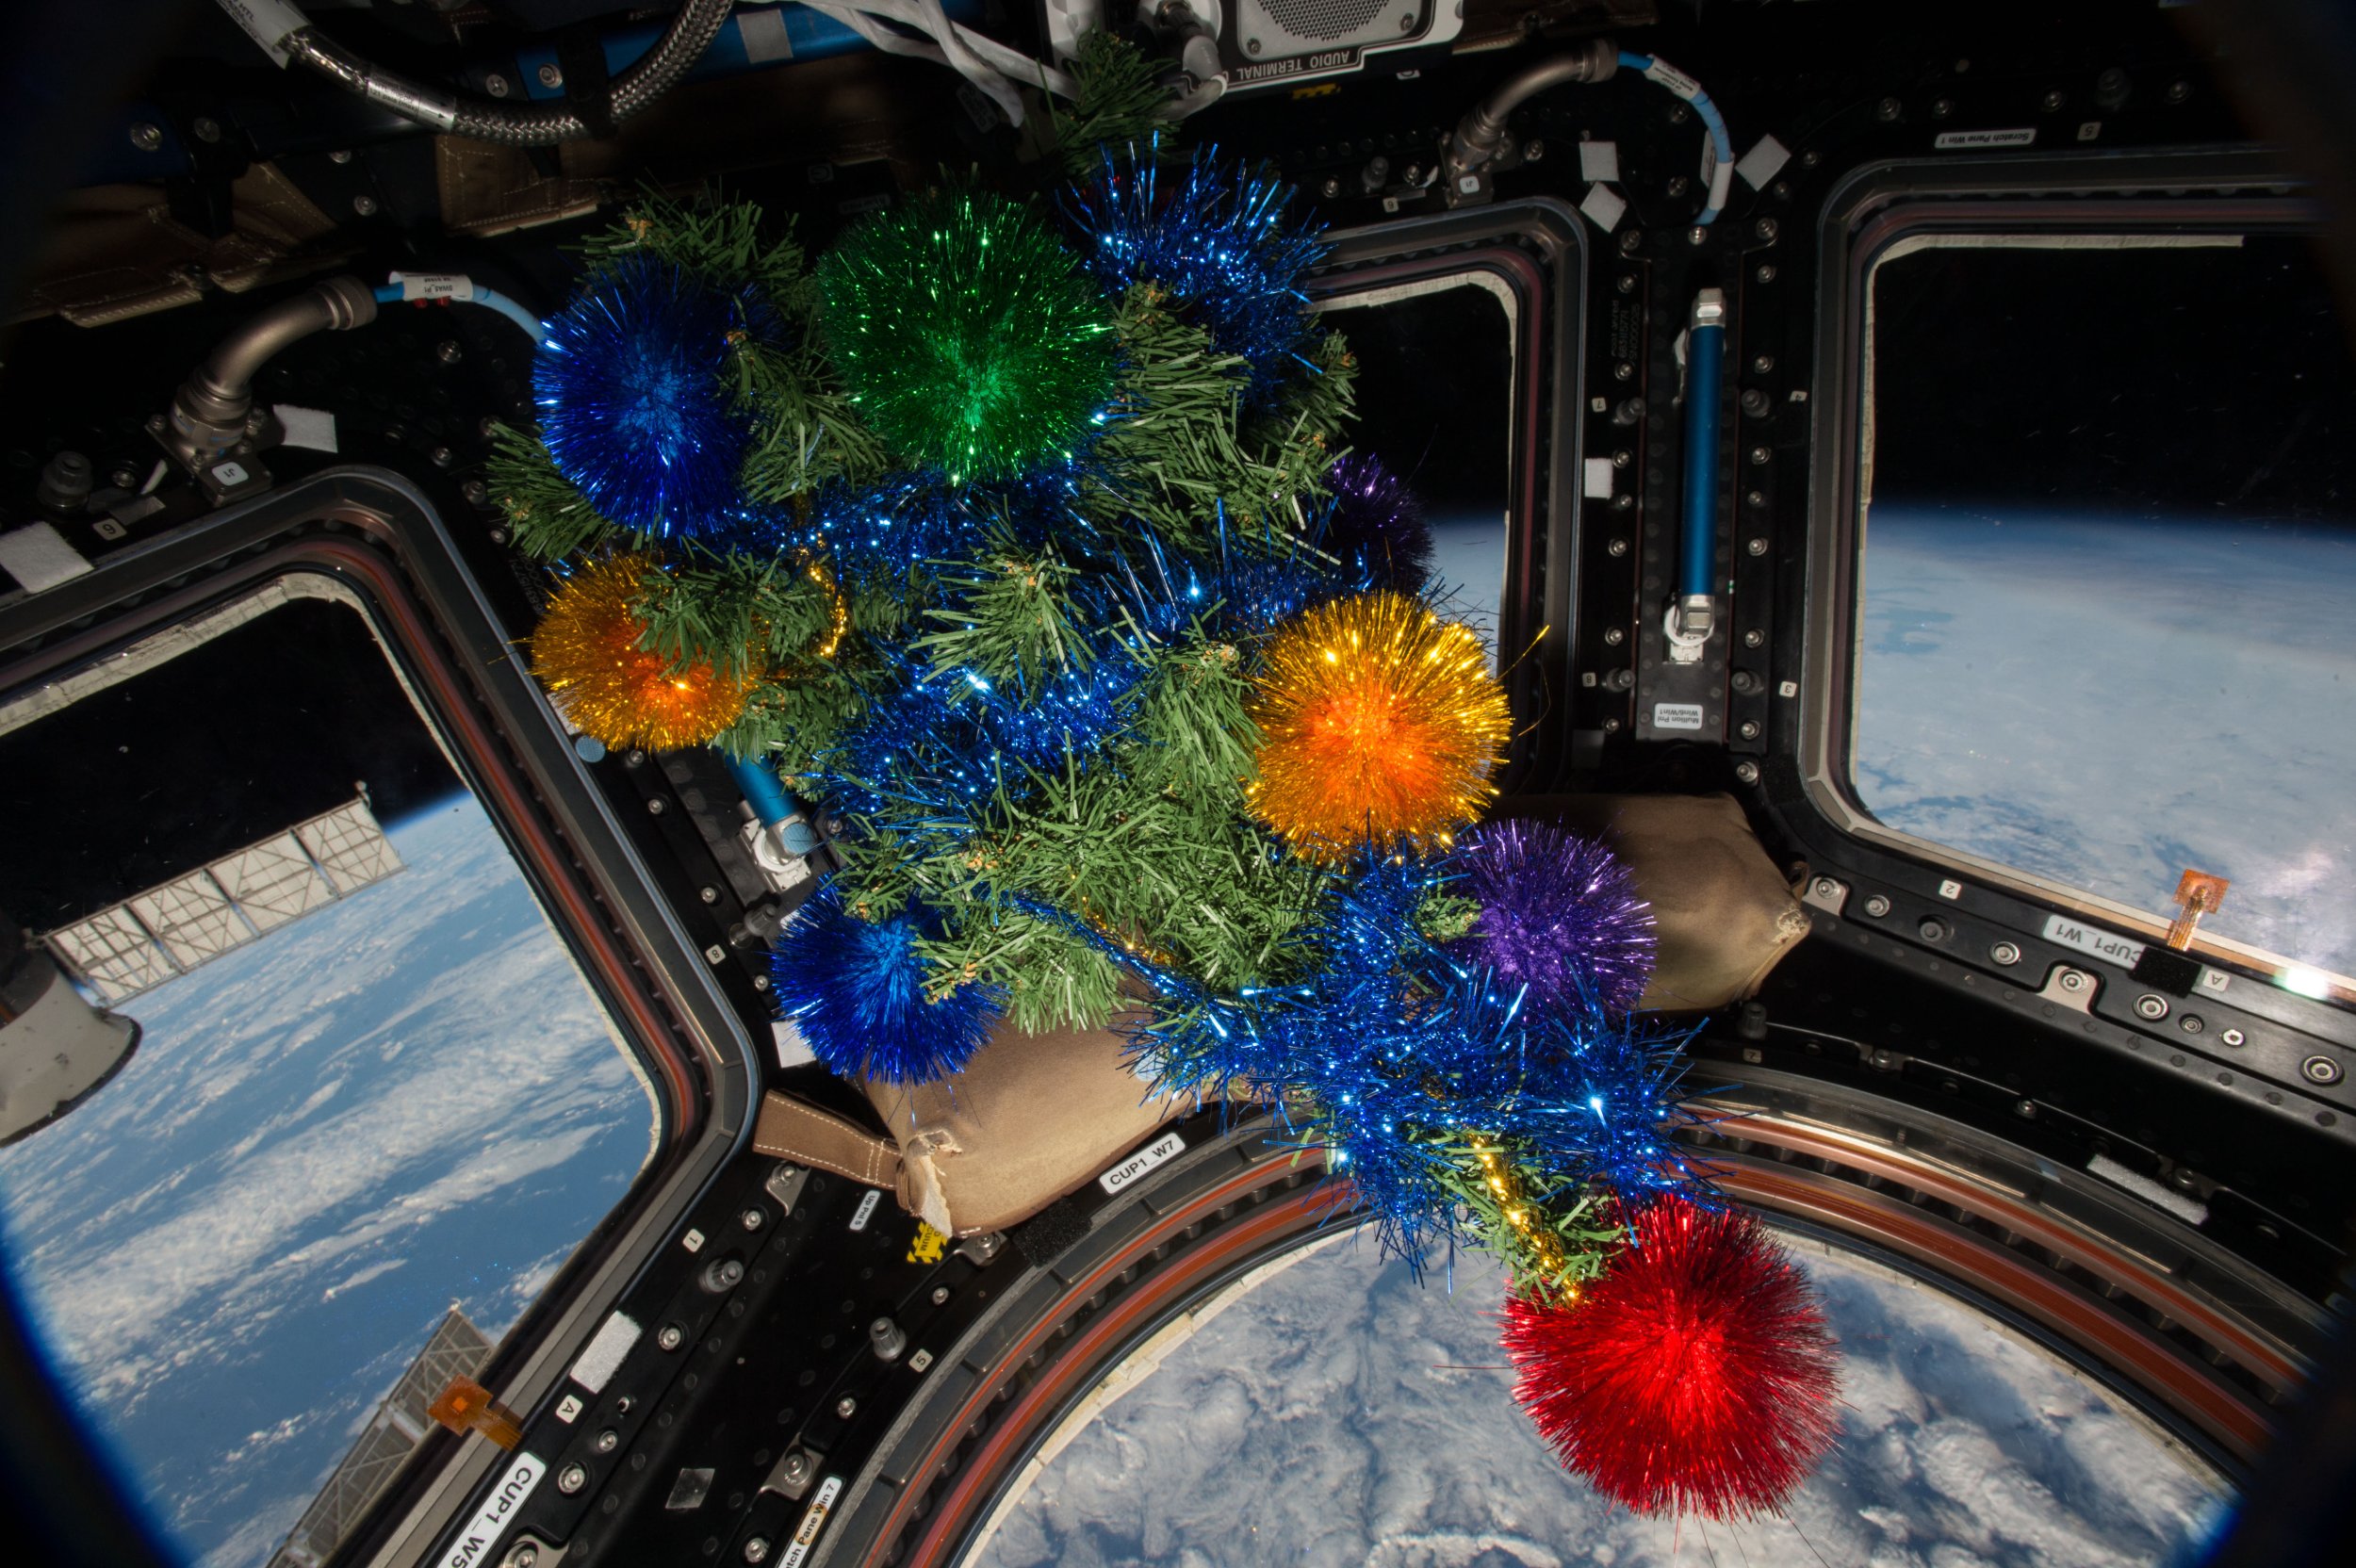 decoration space station